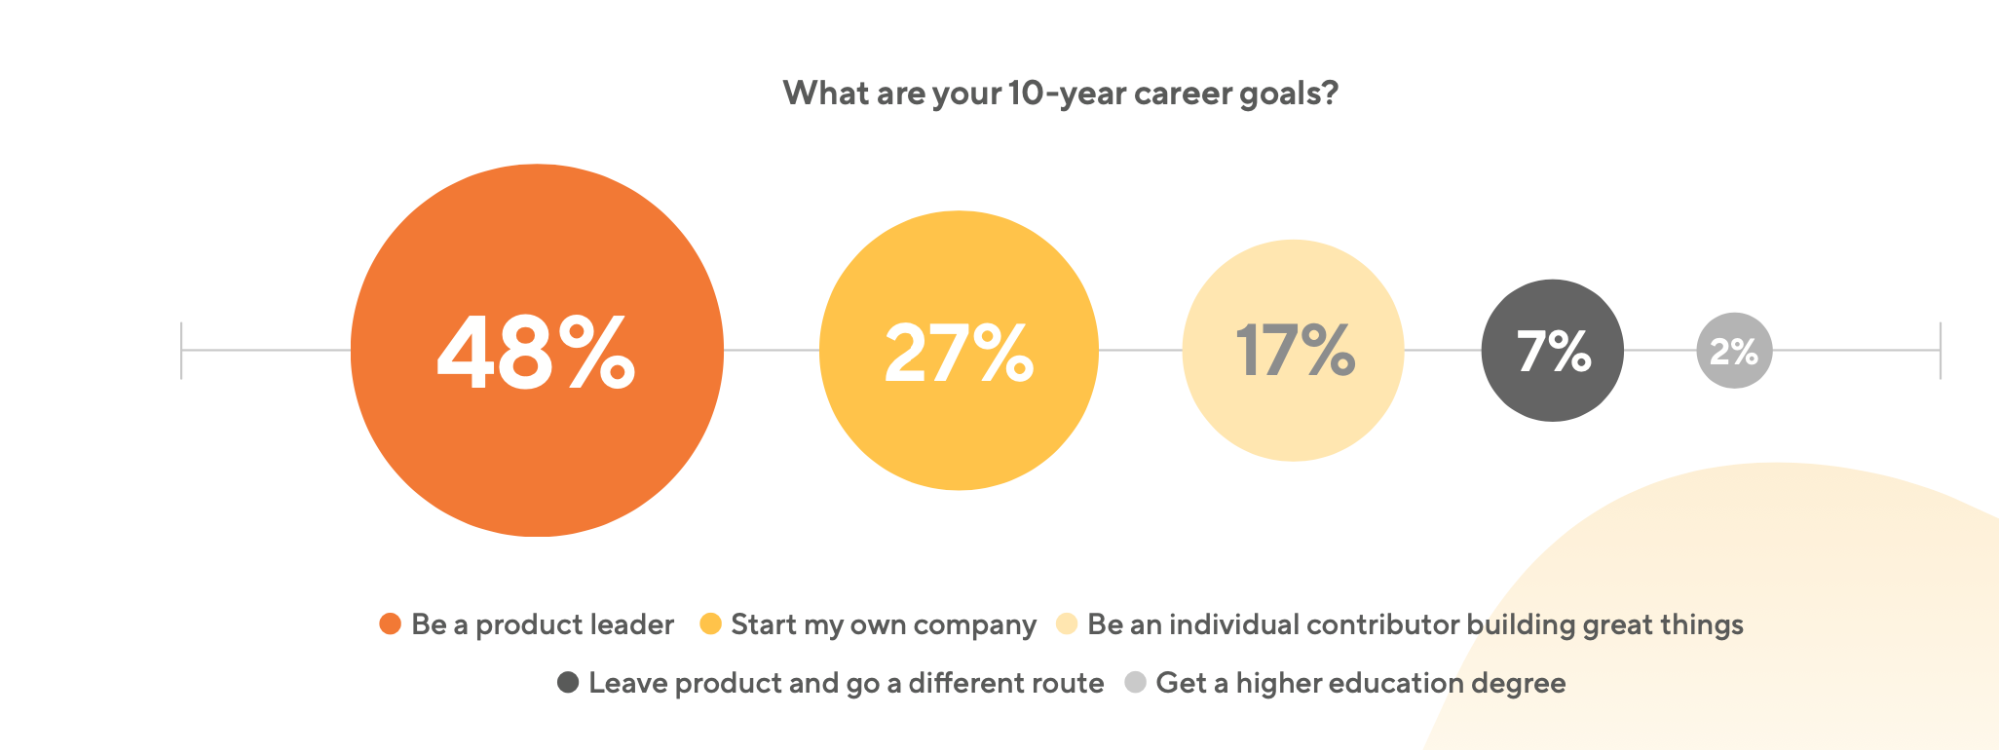 Career Goals Product Managers | State of Product Management Report | ProductPlan | Entrepreneur